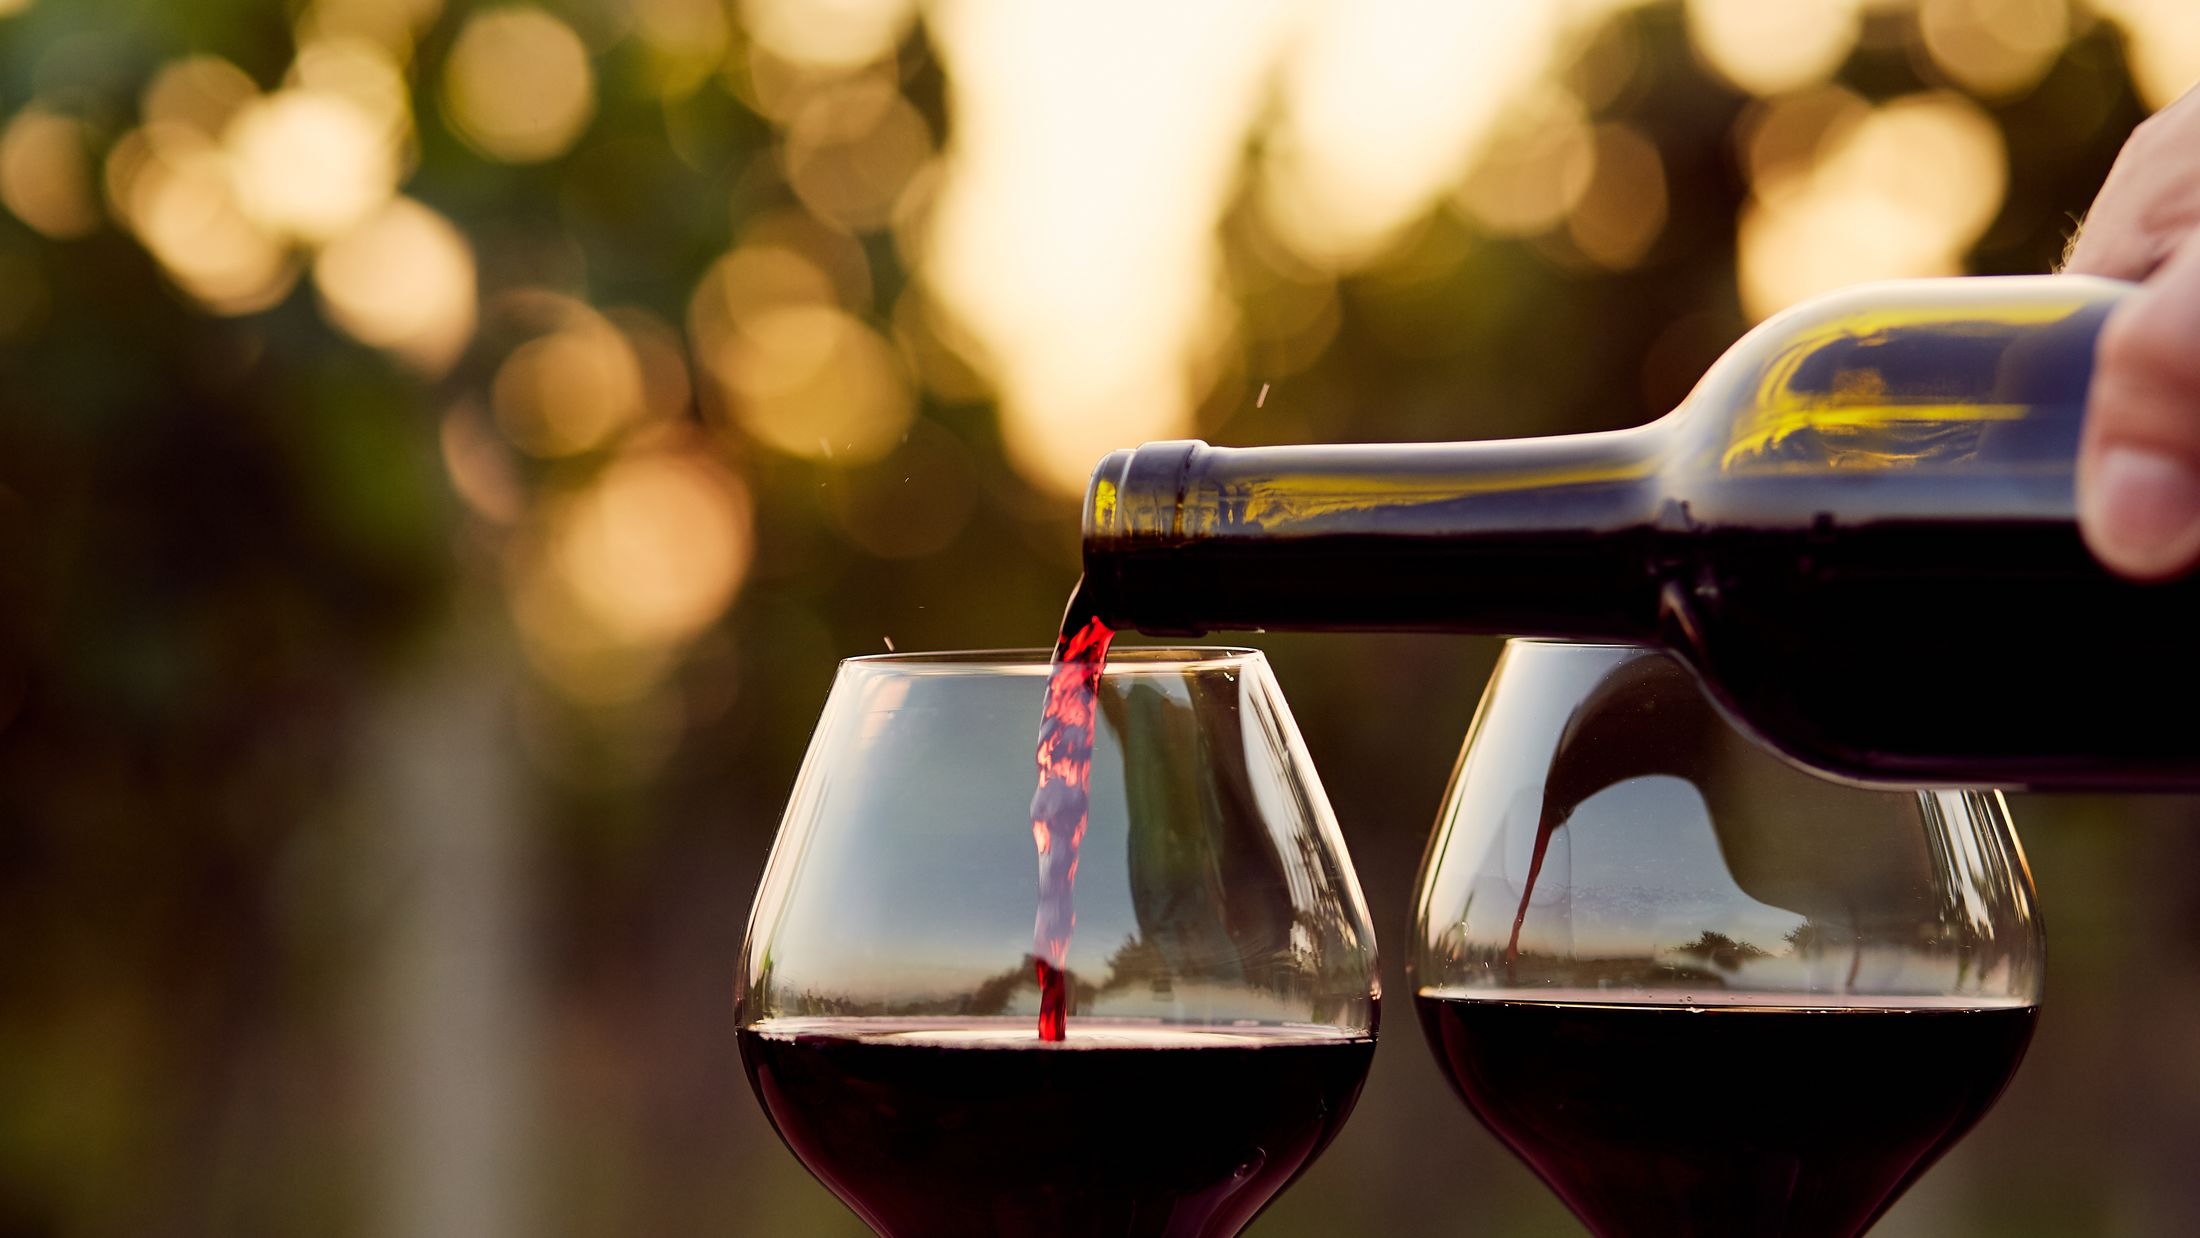 Pouring red wine into glasses in the vineyard, toned; Shutterstock ID 314750660; PO: Project Italy - Facilities images; Job: Project Italy - Facilities images; Client: H&J/Citalia